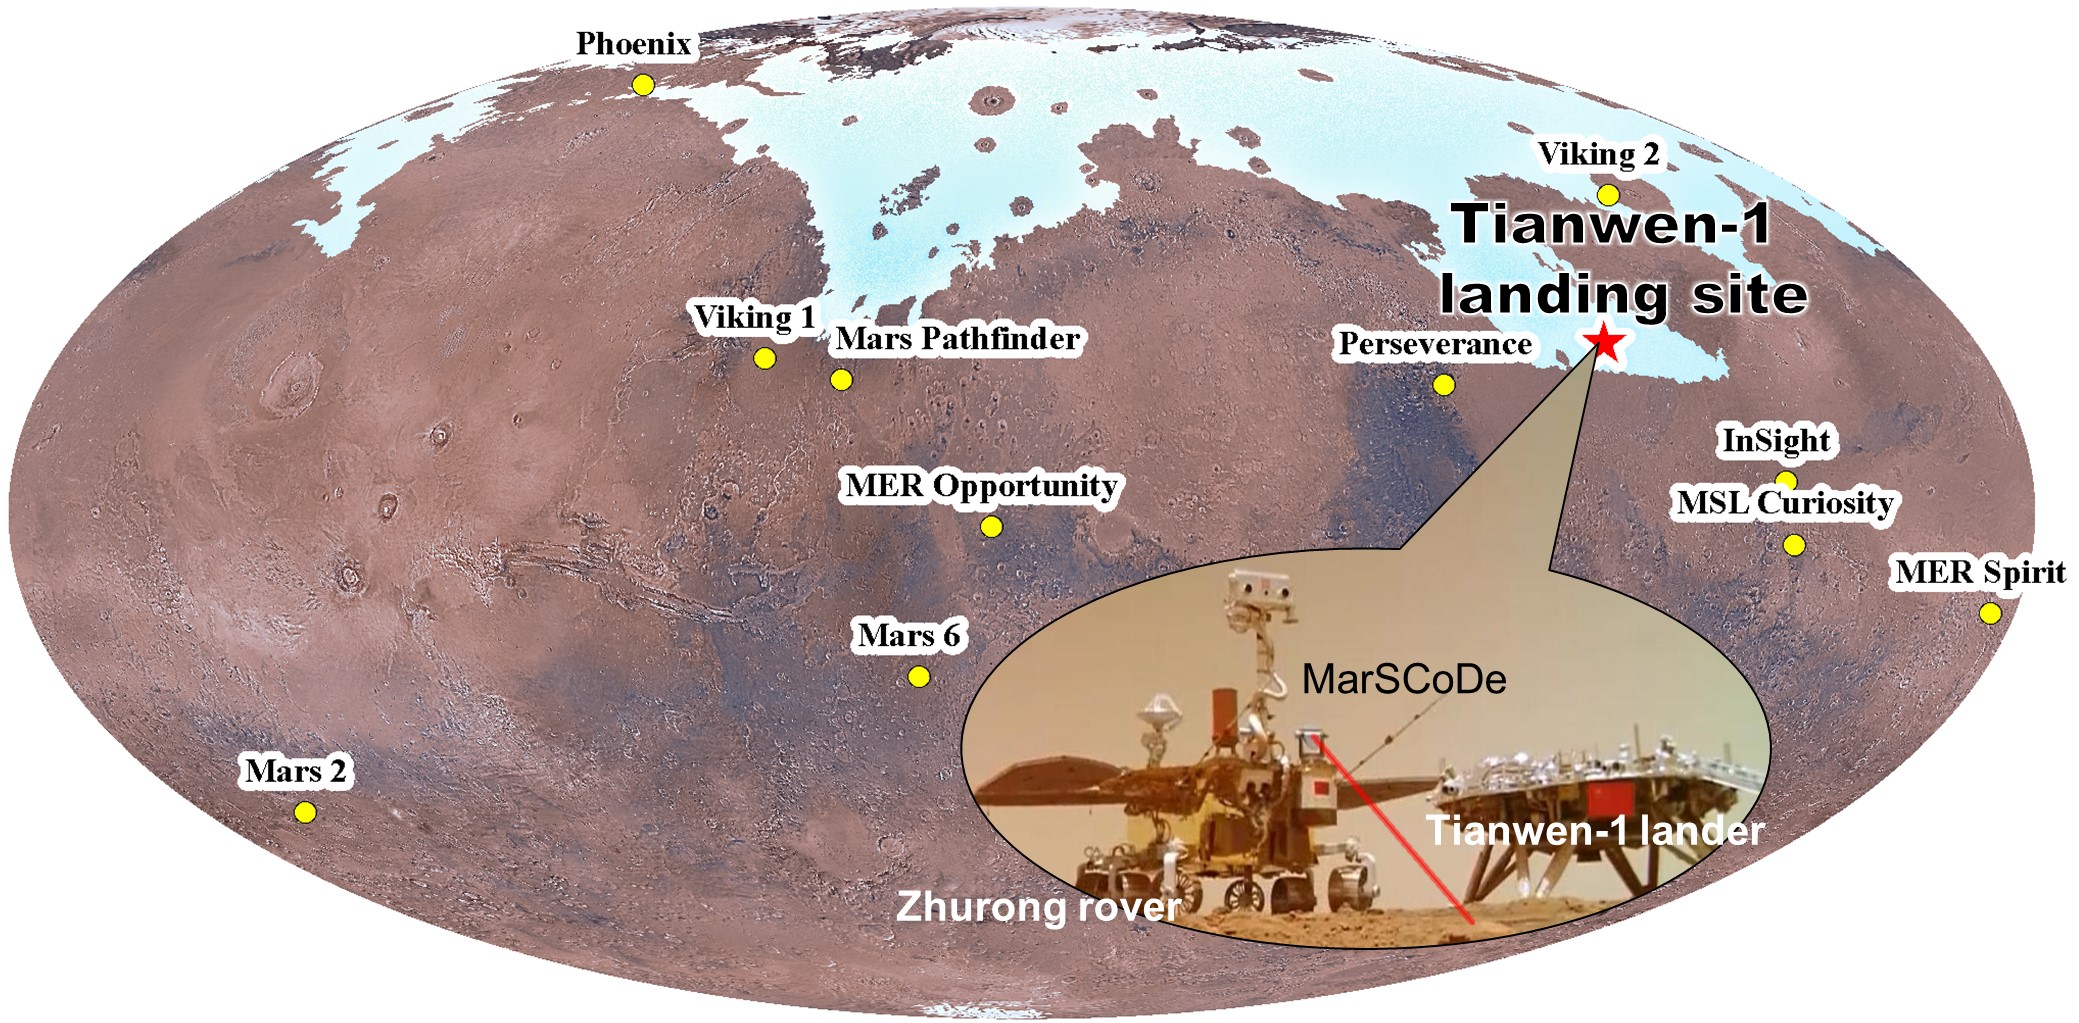 Researchers at Shandong University Evaluate the Aqueous Alteration Degree at The Tianwen-1 Landing Site Using Spectroscopic Datasets From Zhurong Rover